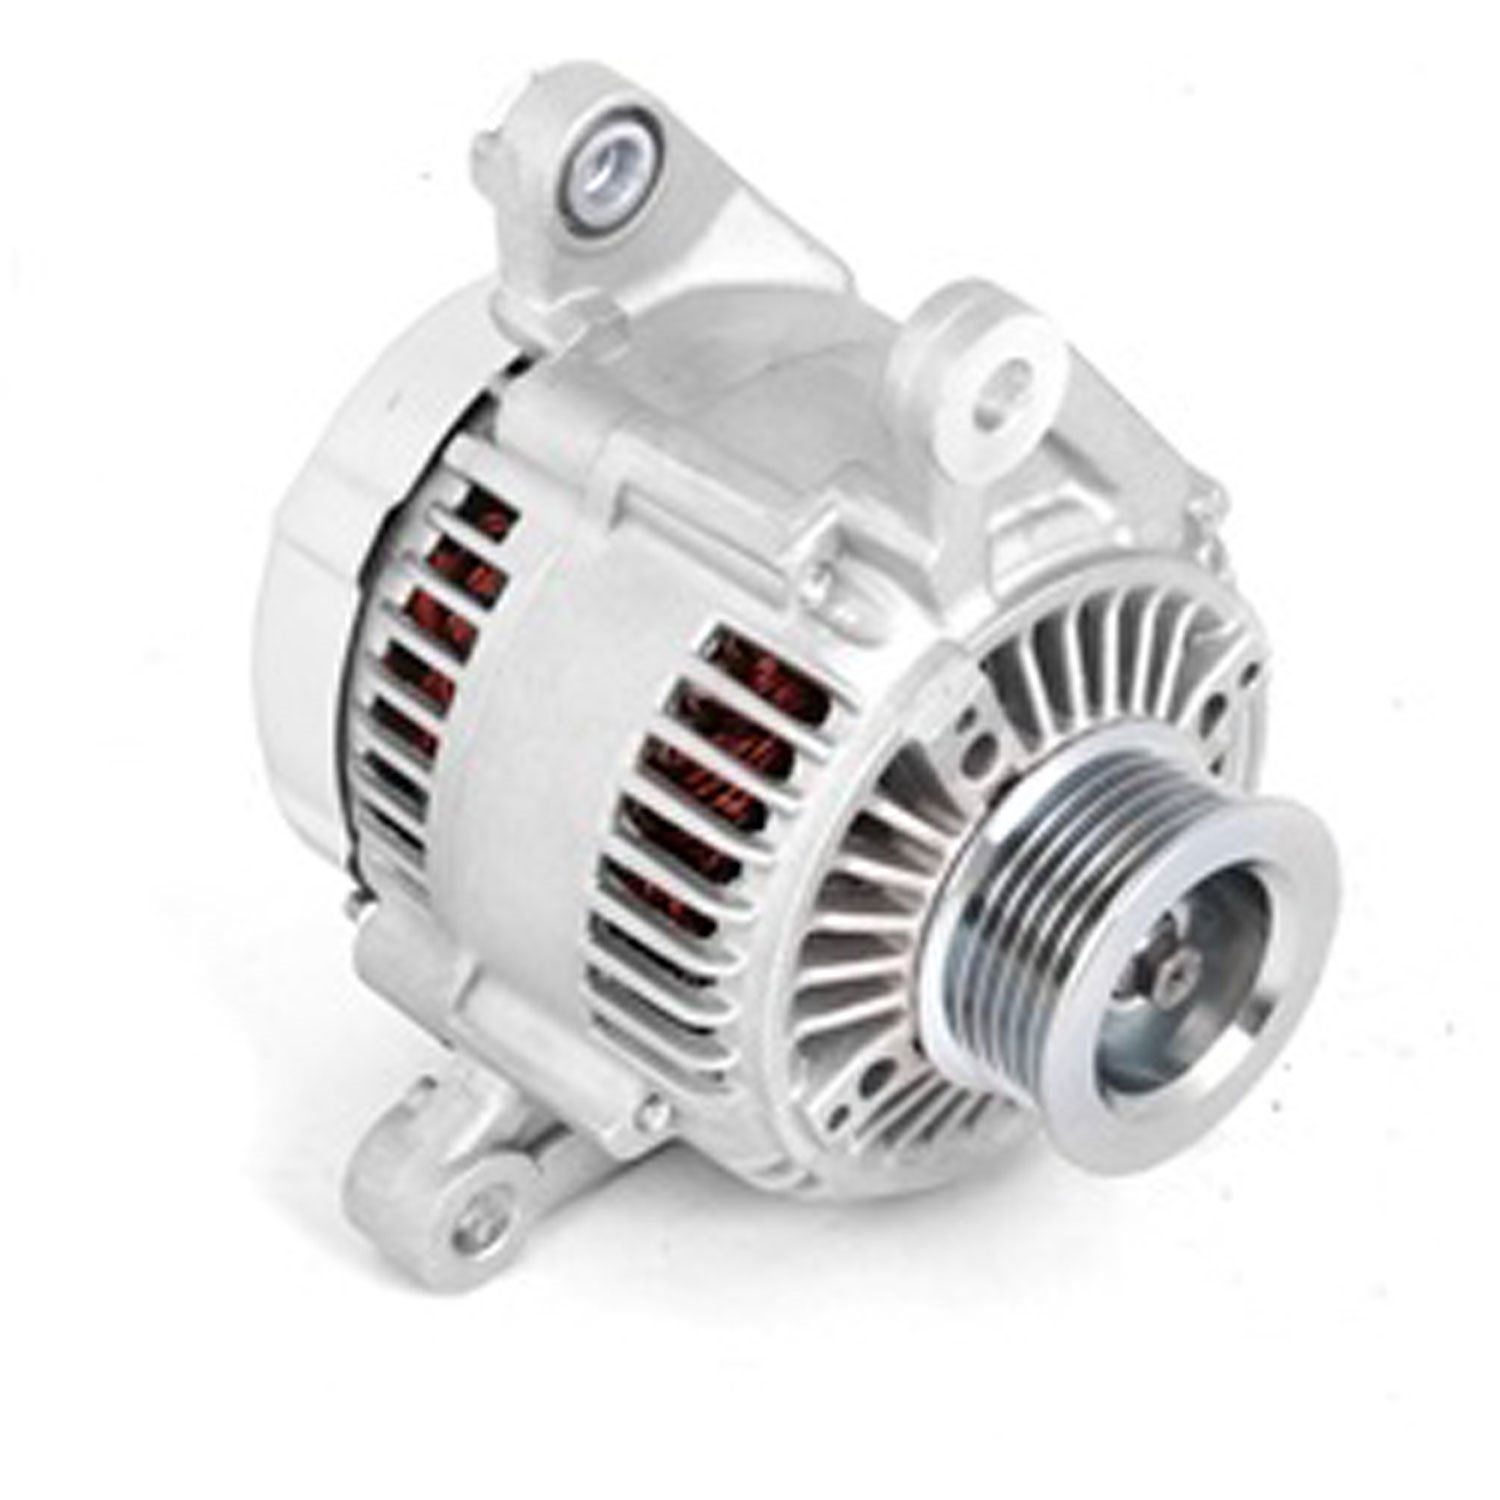 Replacement 117 Amp Alternator For 2000 Jeep Wrangler TJ 4.0L By Omix-ADA